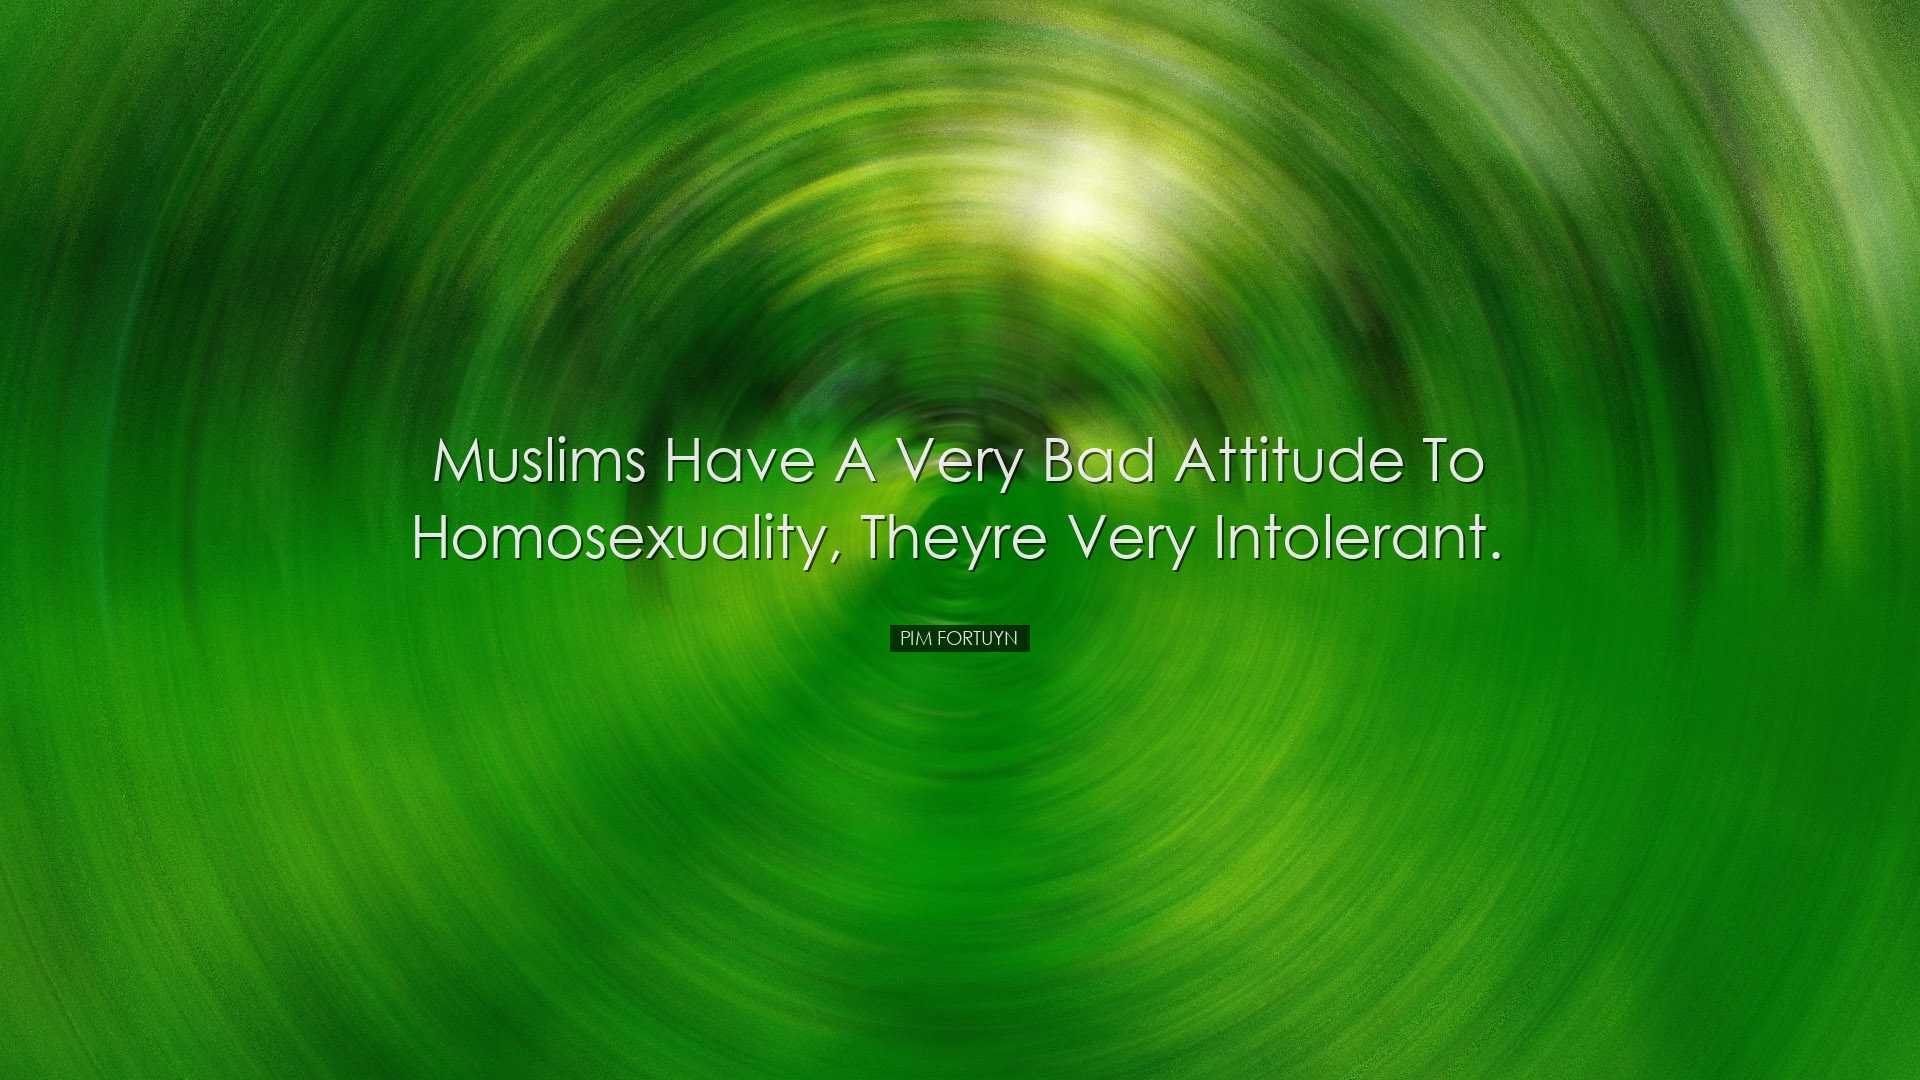 Muslims have a very bad attitude to homosexuality, theyre very int